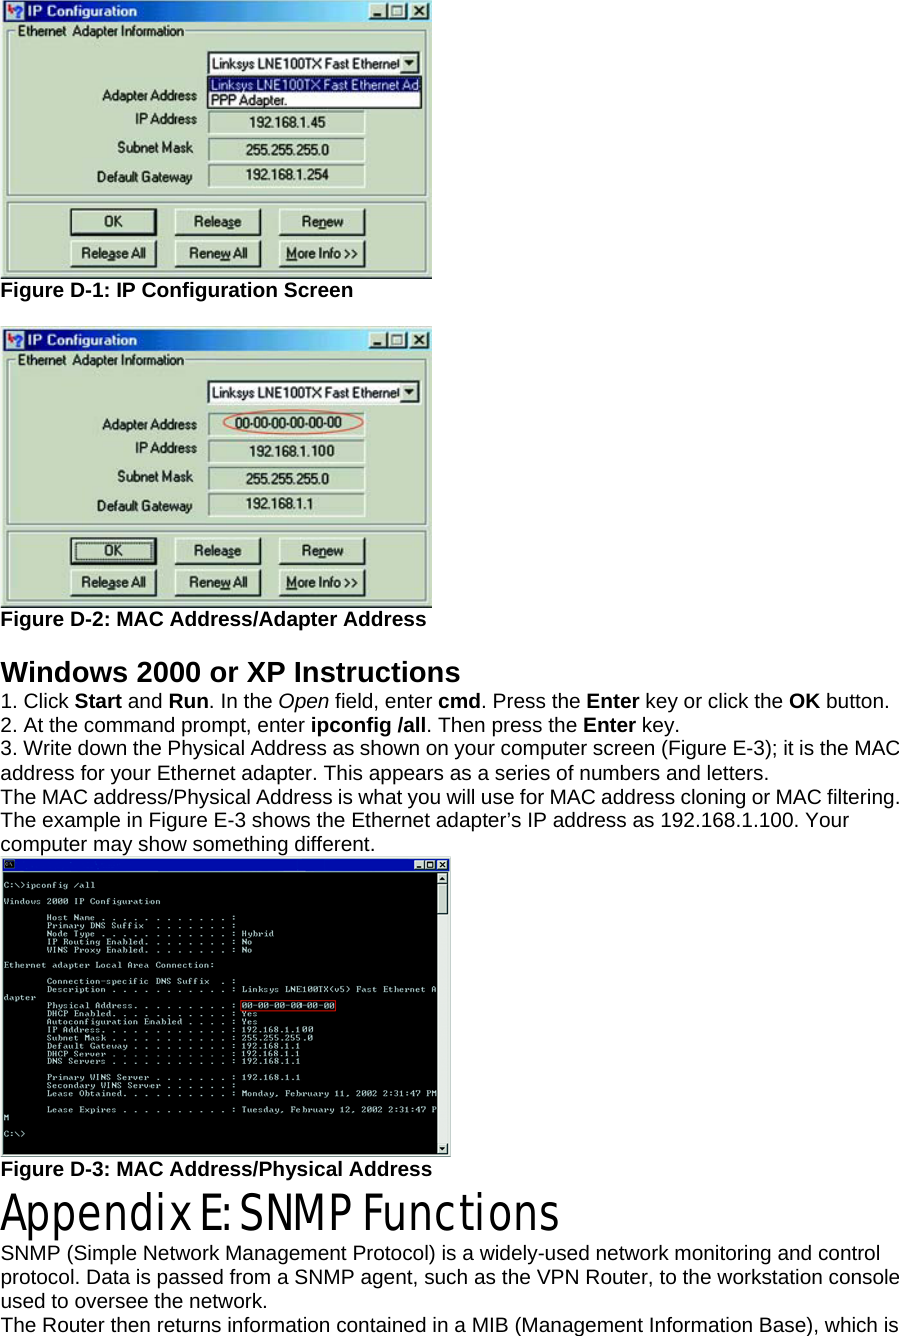  Figure D-1: IP Configuration Screen   Figure D-2: MAC Address/Adapter Address  Windows 2000 or XP Instructions 1. Click Start and Run. In the Open field, enter cmd. Press the Enter key or click the OK button. 2. At the command prompt, enter ipconfig /all. Then press the Enter key. 3. Write down the Physical Address as shown on your computer screen (Figure E-3); it is the MAC address for your Ethernet adapter. This appears as a series of numbers and letters. The MAC address/Physical Address is what you will use for MAC address cloning or MAC filtering. The example in Figure E-3 shows the Ethernet adapter’s IP address as 192.168.1.100. Your computer may show something different.  Figure D-3: MAC Address/Physical Address Appendix E: SNMP Functions SNMP (Simple Network Management Protocol) is a widely-used network monitoring and control protocol. Data is passed from a SNMP agent, such as the VPN Router, to the workstation console used to oversee the network. The Router then returns information contained in a MIB (Management Information Base), which is 